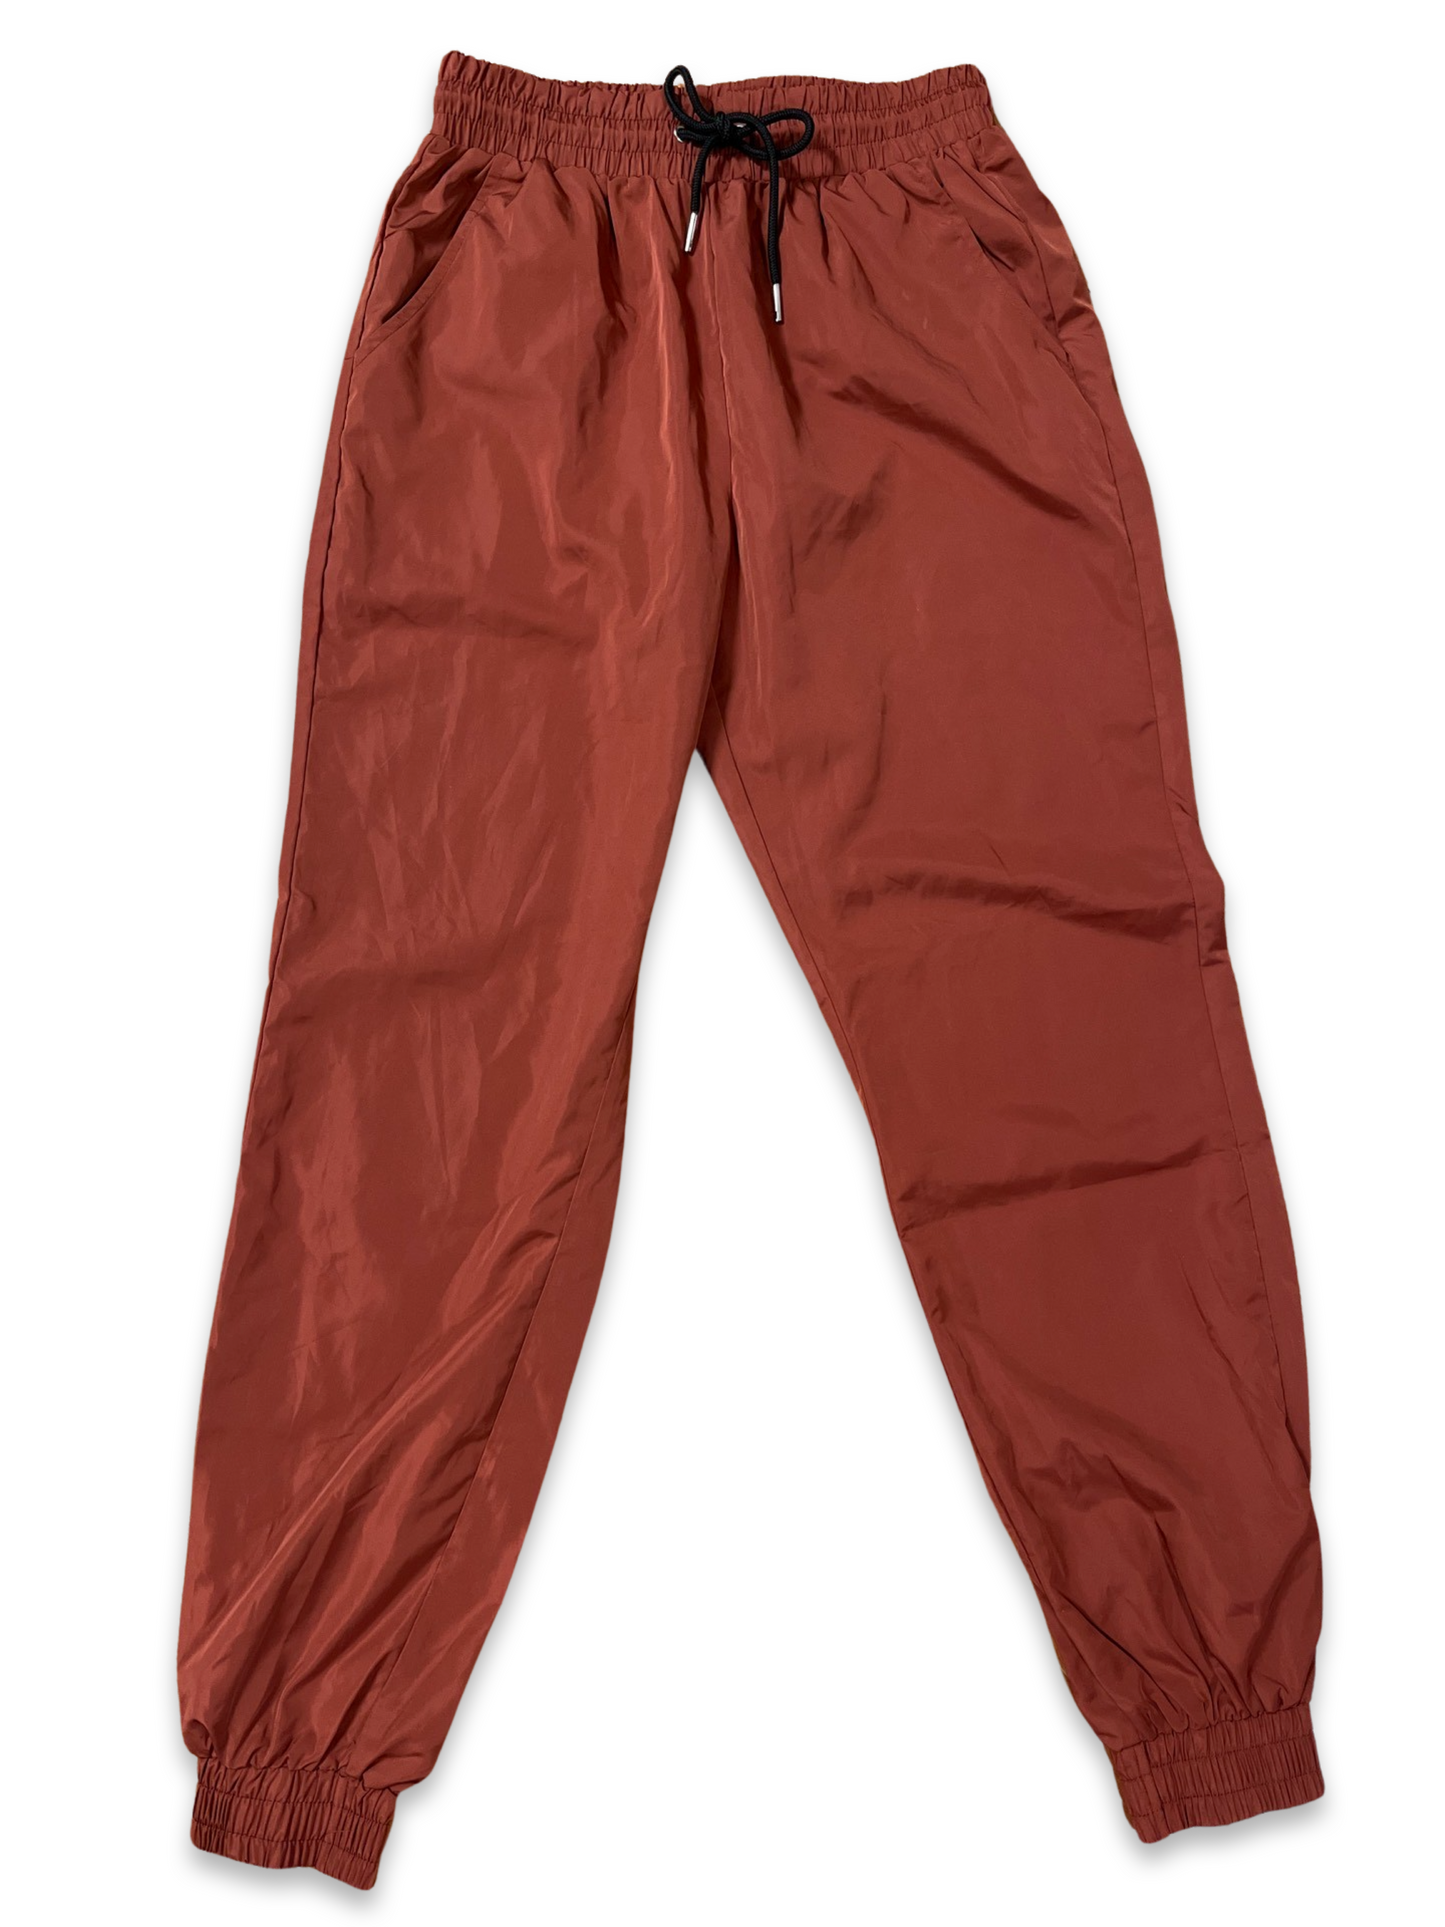 Baggy Joggers - Rust (S)